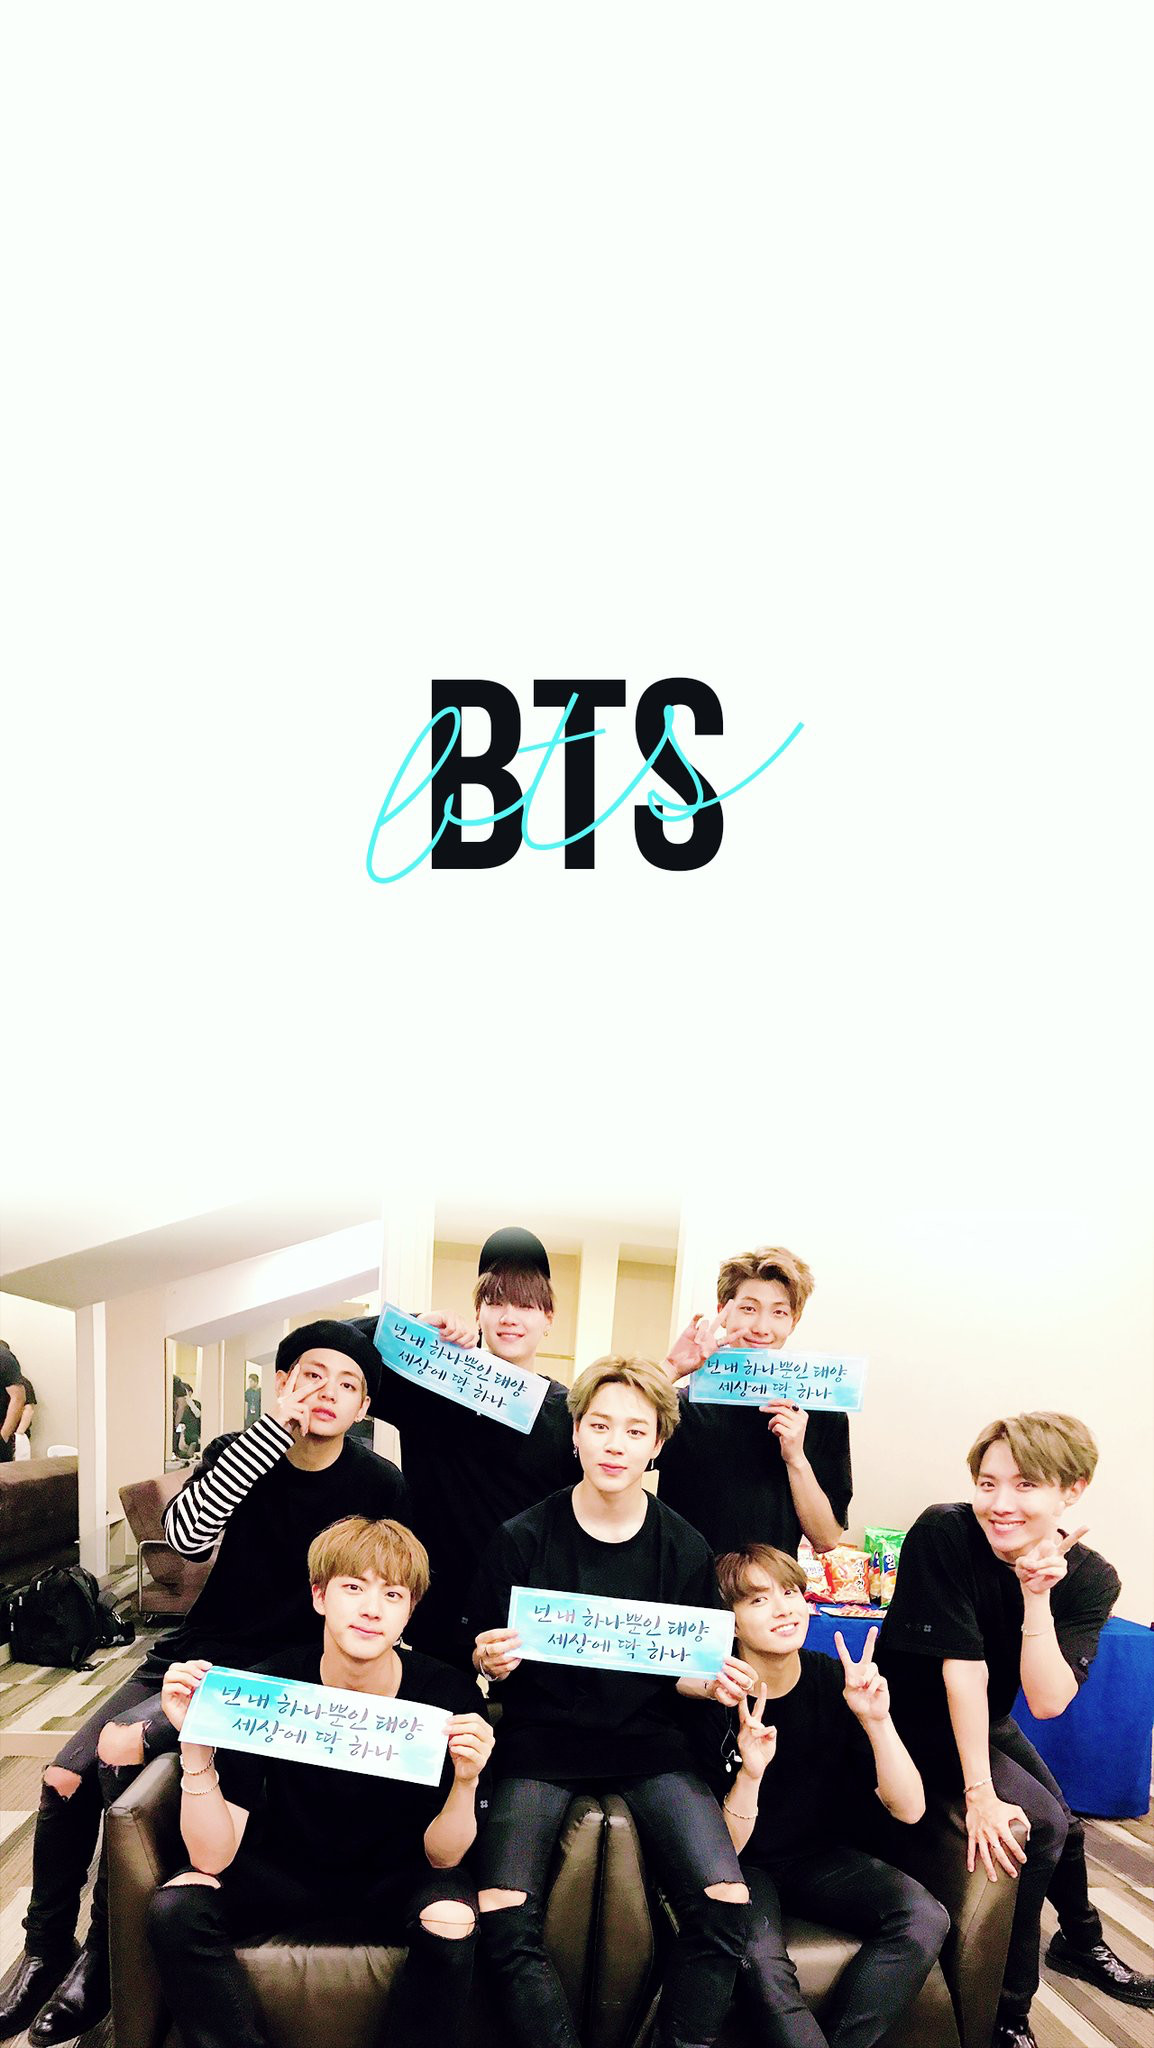 Bts iPhone Wallpaper Image In Collection